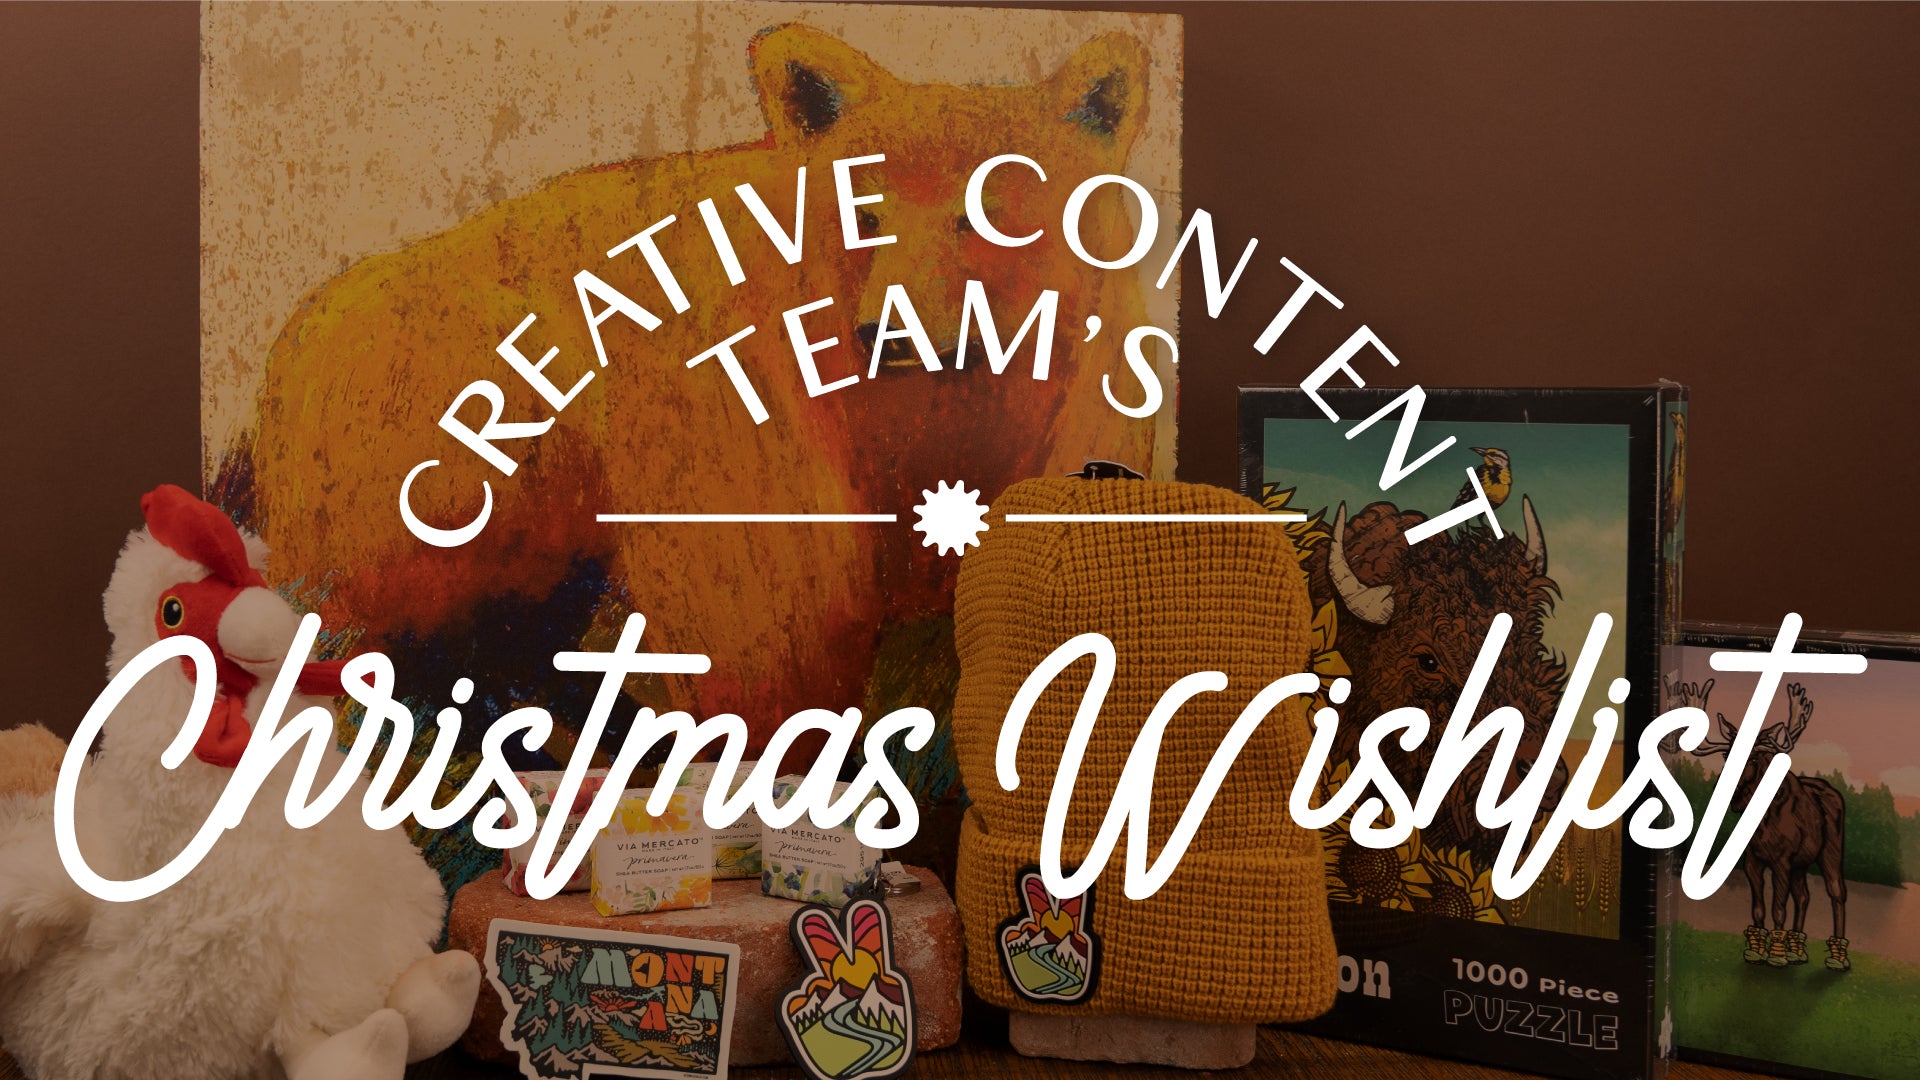 The Creative Content Team's Christmas Wishlist - It's Never Too Early!